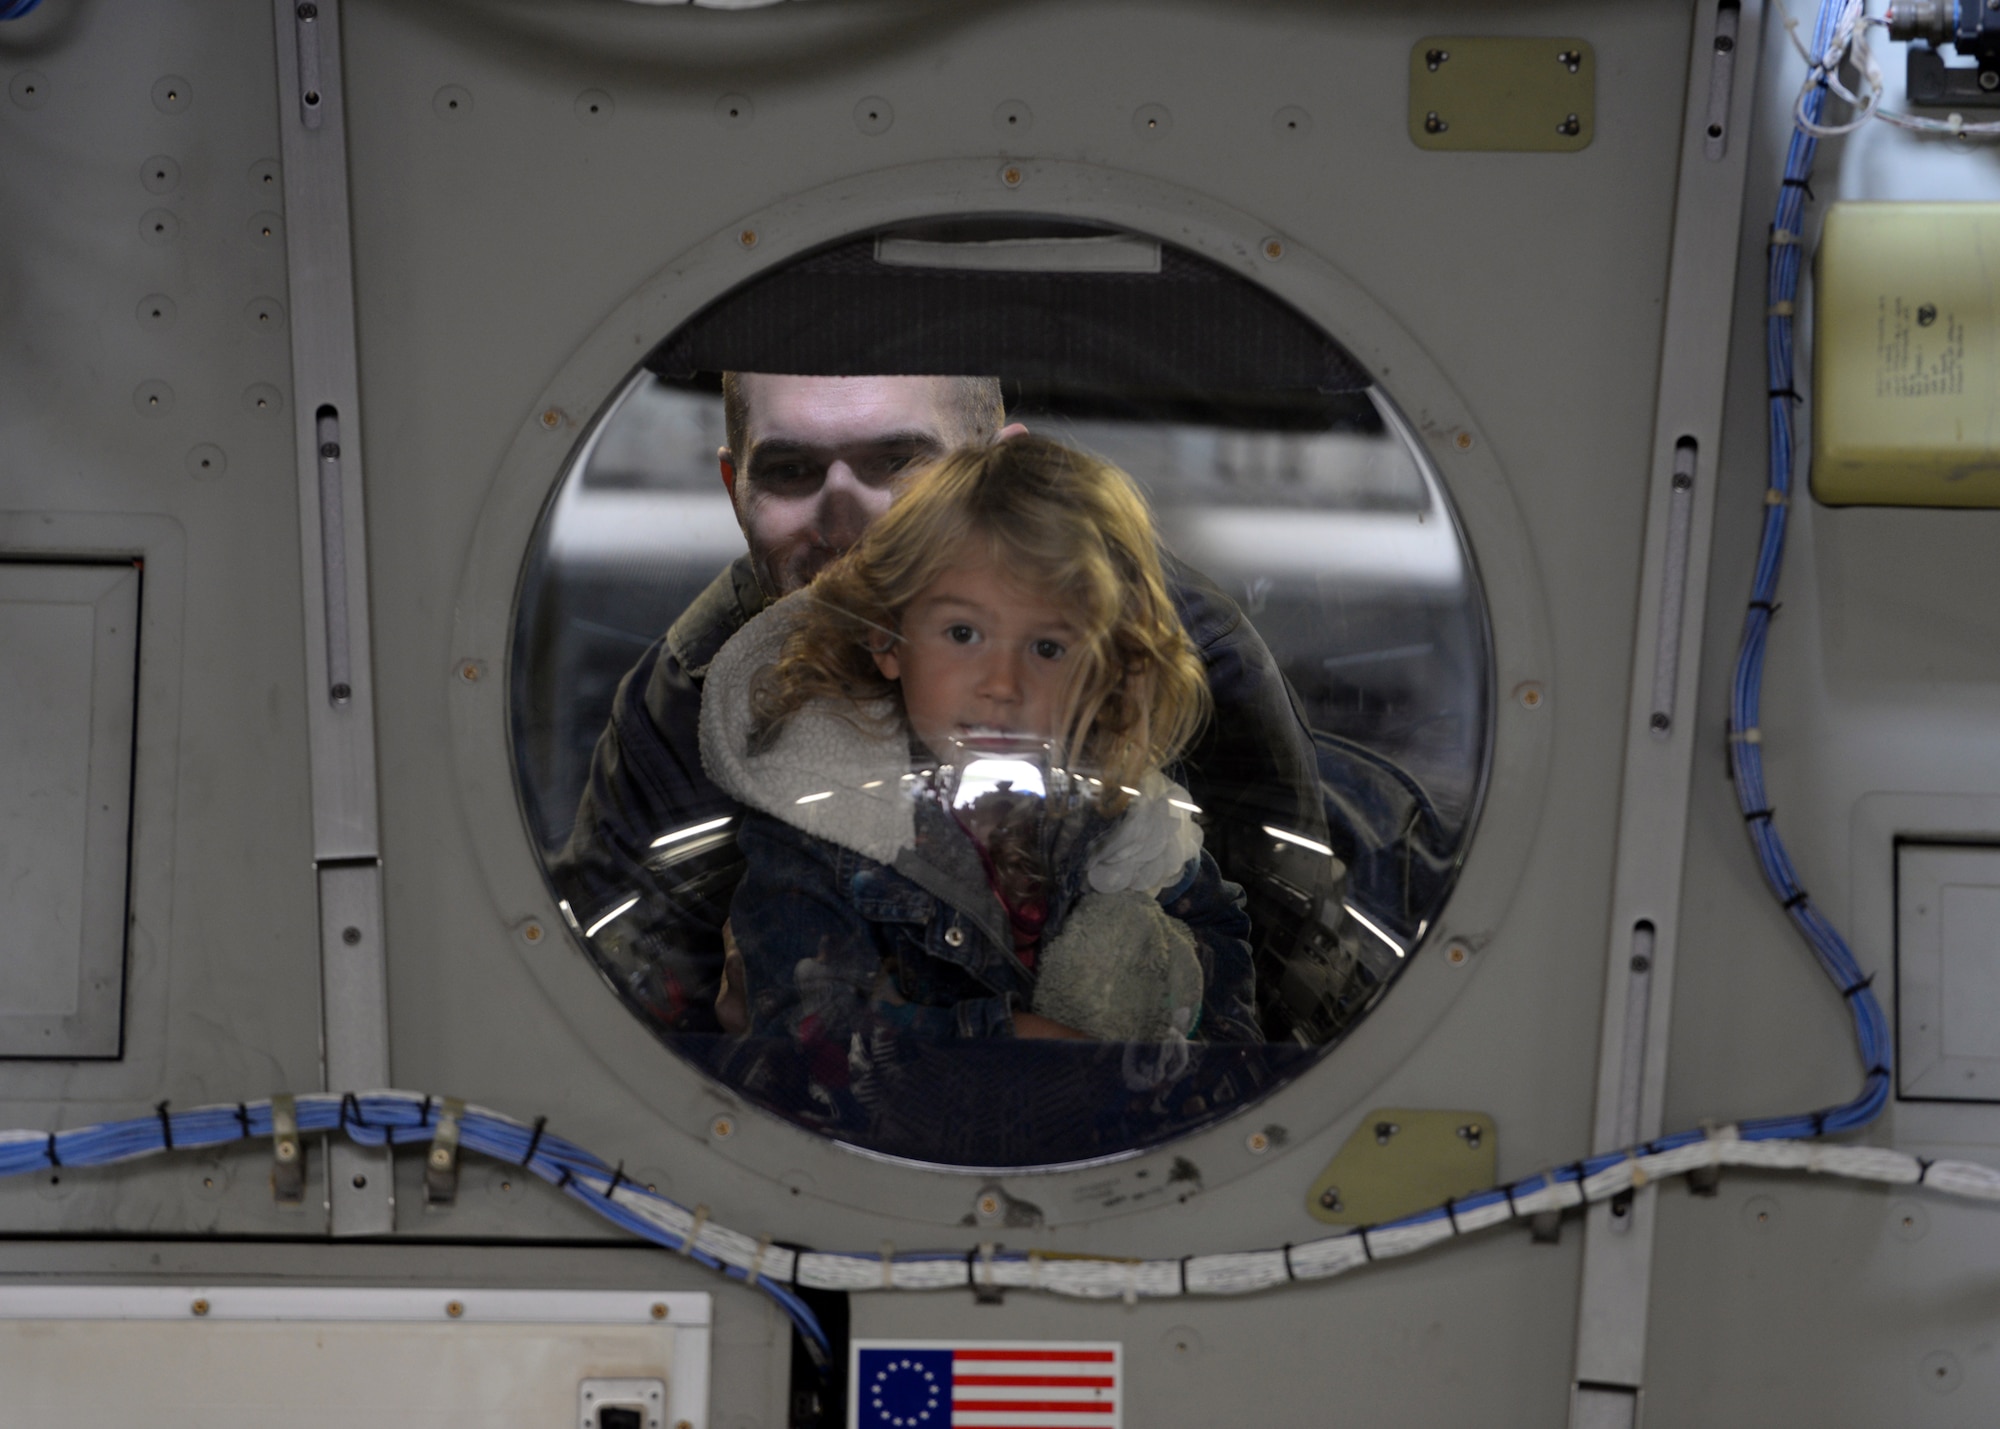 ALTUS AIR FORCE BASE, Okla. – U.S. Air Force Capt. Thomas Bockrath, and his daughter look out a window inside a C-17 Globemaster III cargo aircraft from Altus AFB during the 2014 Wings of Freedom Open House Sept. 13, 2014. Altus AFB is the training base for all U.S. Air Force C-17 pilots and loadmasters, as well as crew members for the KC-135 Stratotanker refueling aircraft. There were multiple static display aircraft lined across the flightline for spectators to observe inside and out while waiting for the aerial demonstrations to begin. (U.S. Air Force photo by Senior Airman Franklin R. Ramos/Released)